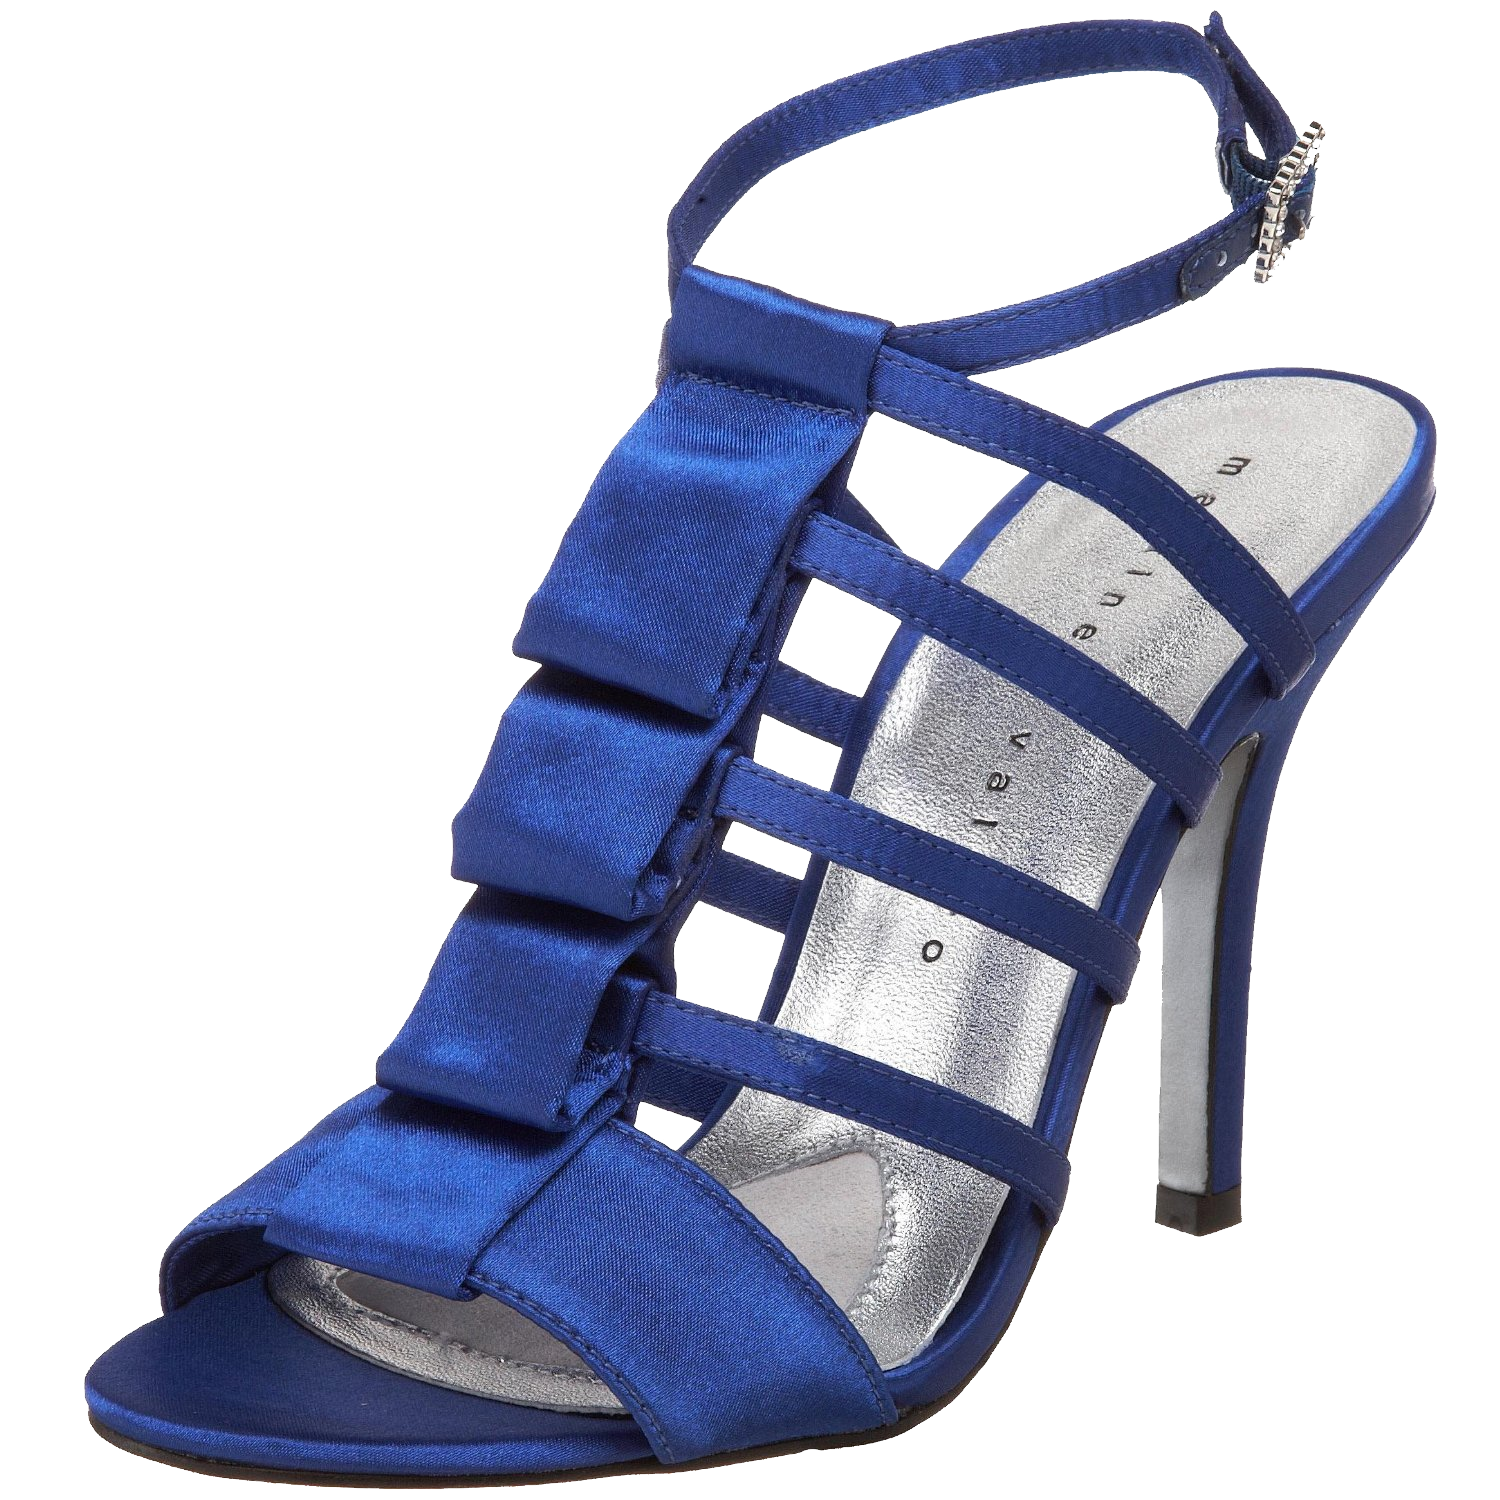 women shoes png images are available for download crazypngm crazy png images #29927